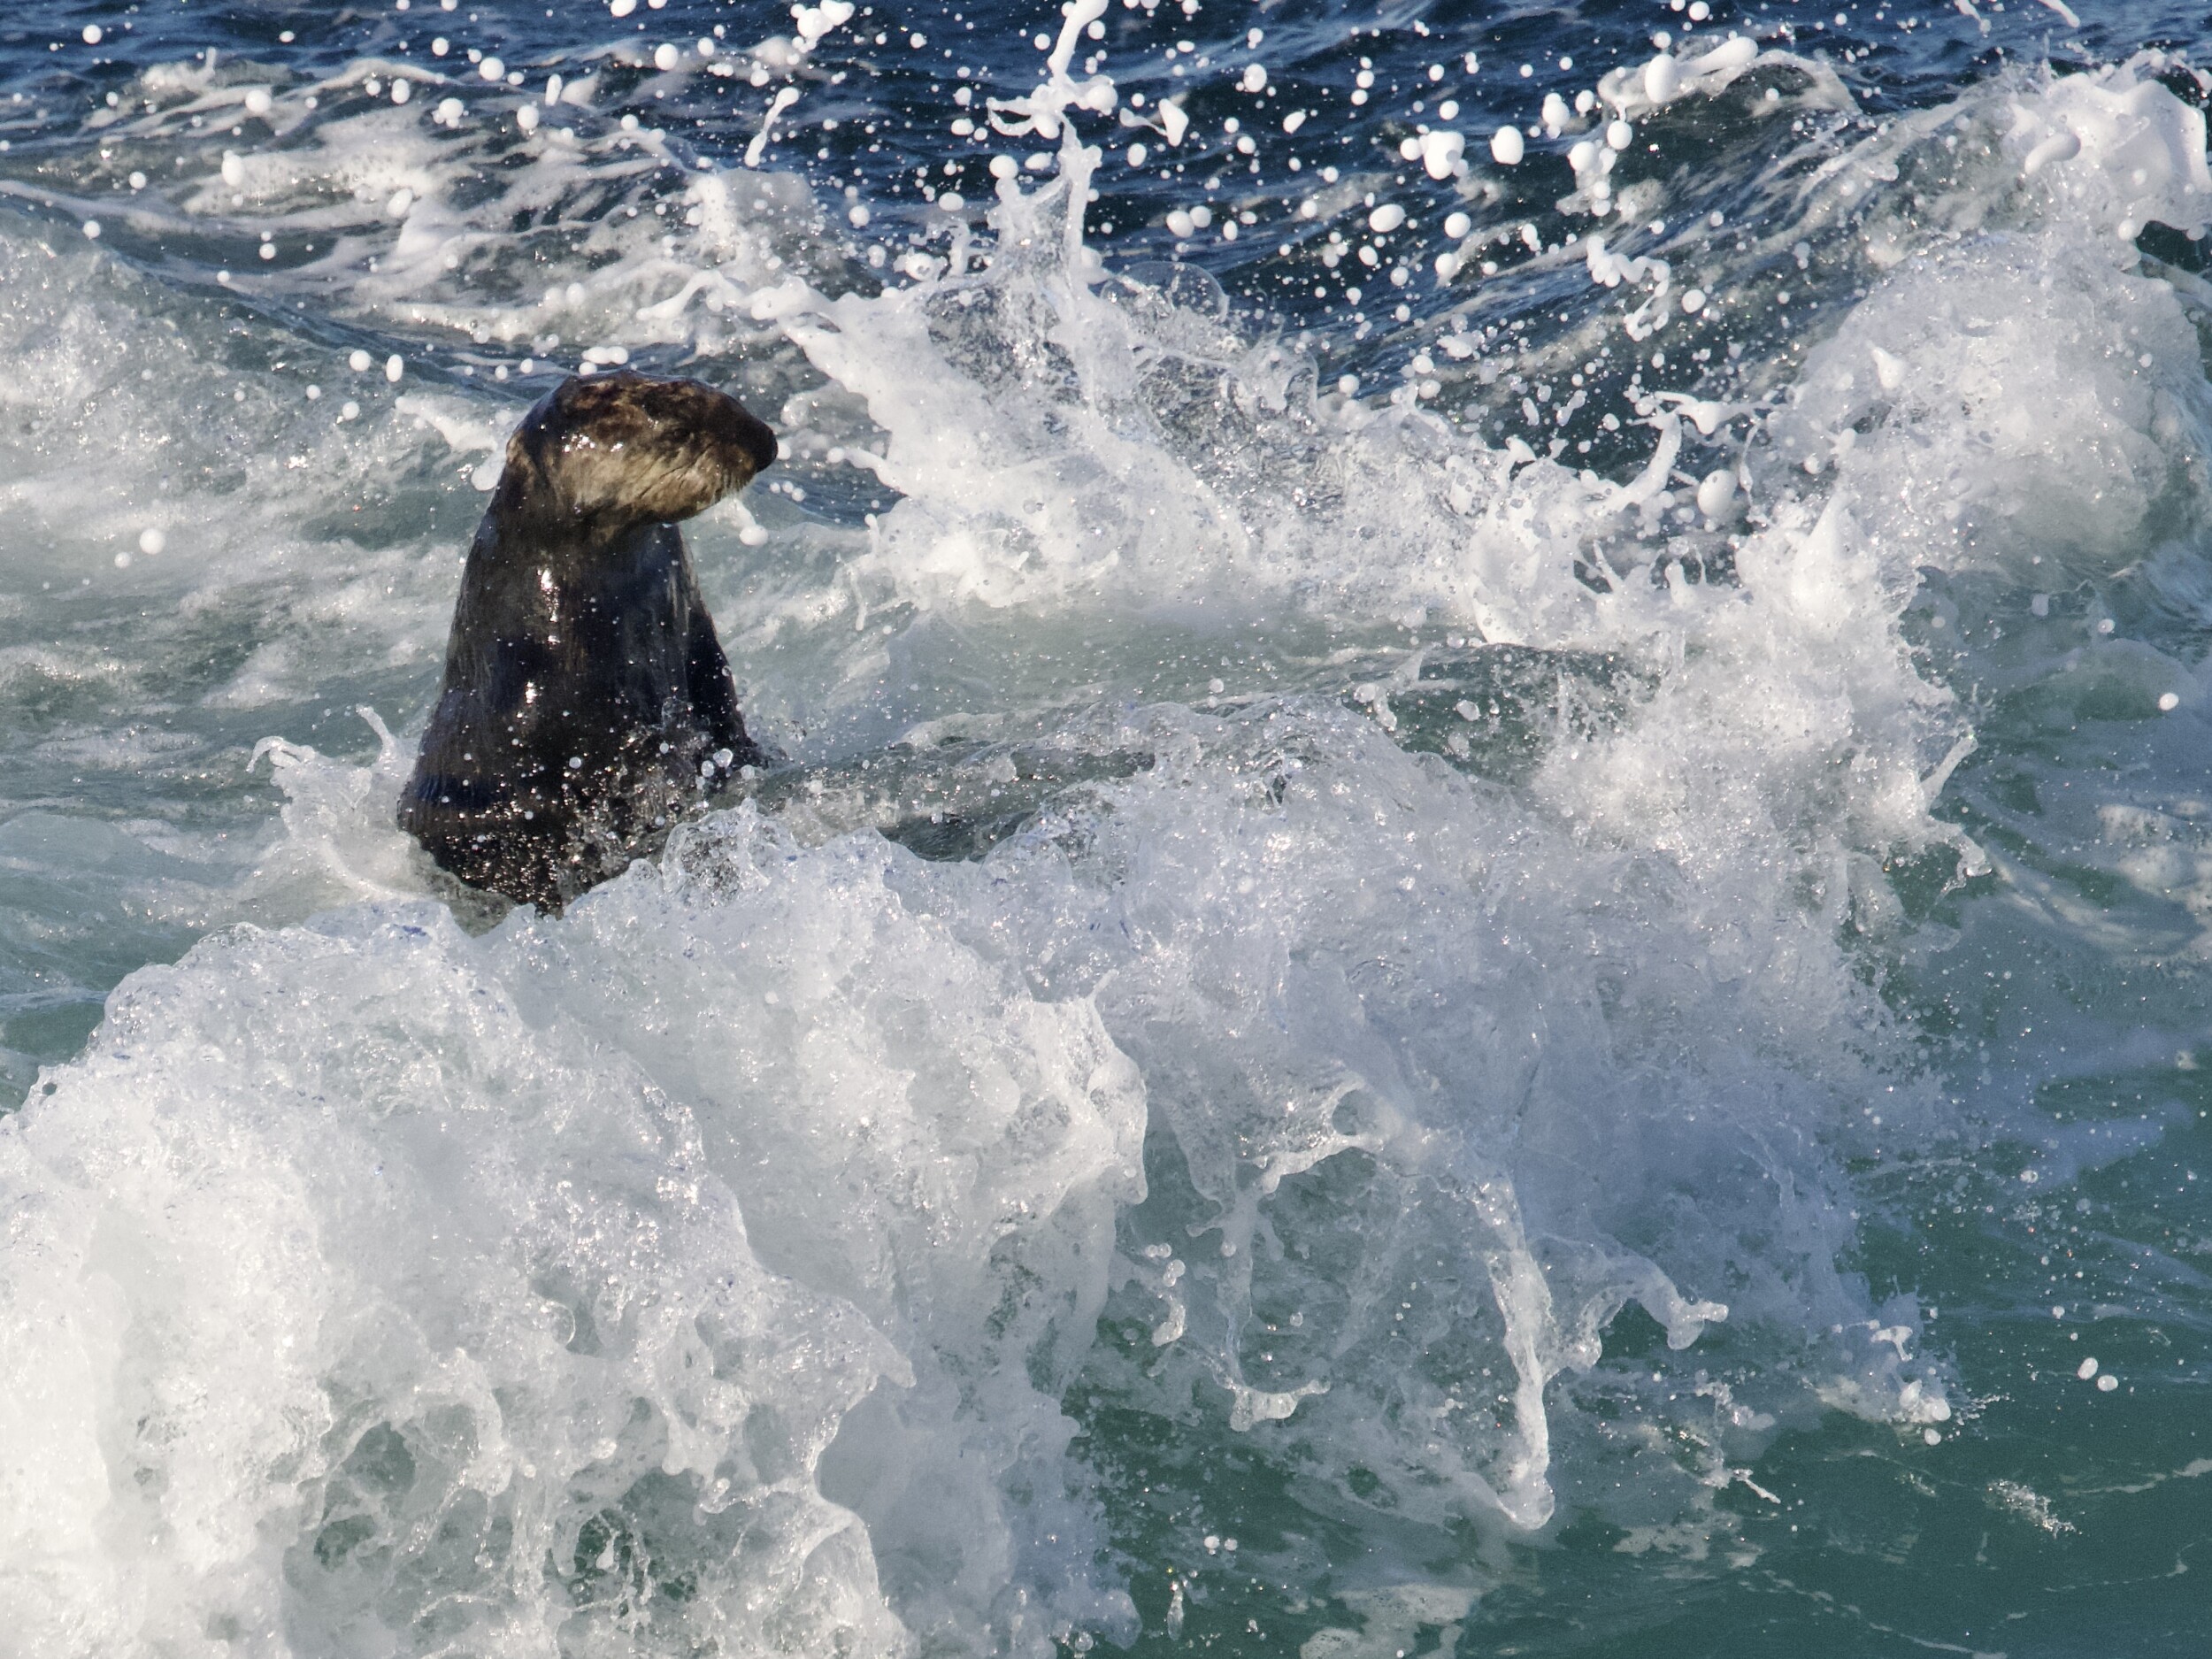 Southern Sea Otter in Crashing Surf